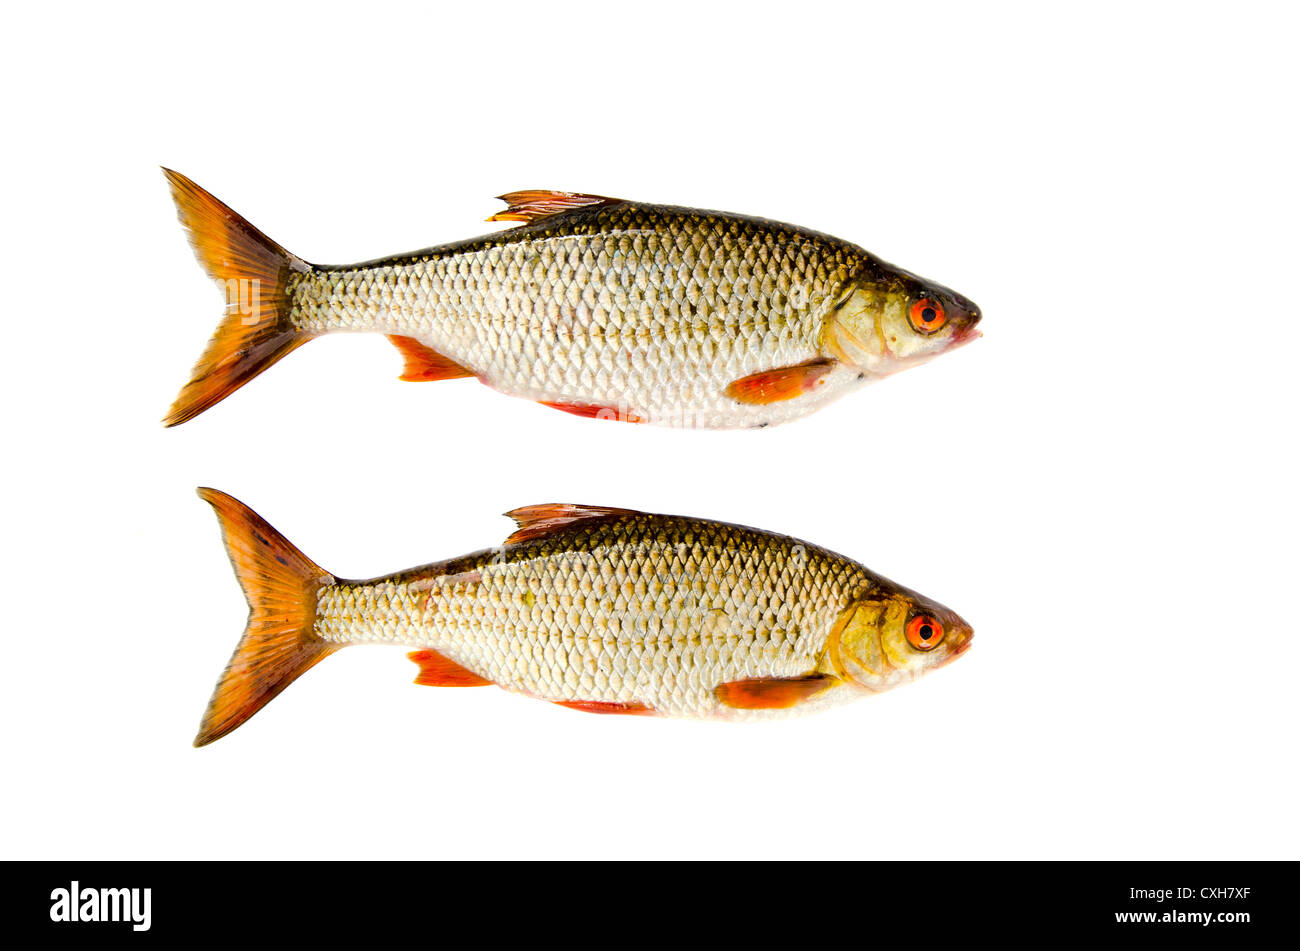 isolated on white background two roach fishes Stock Photo